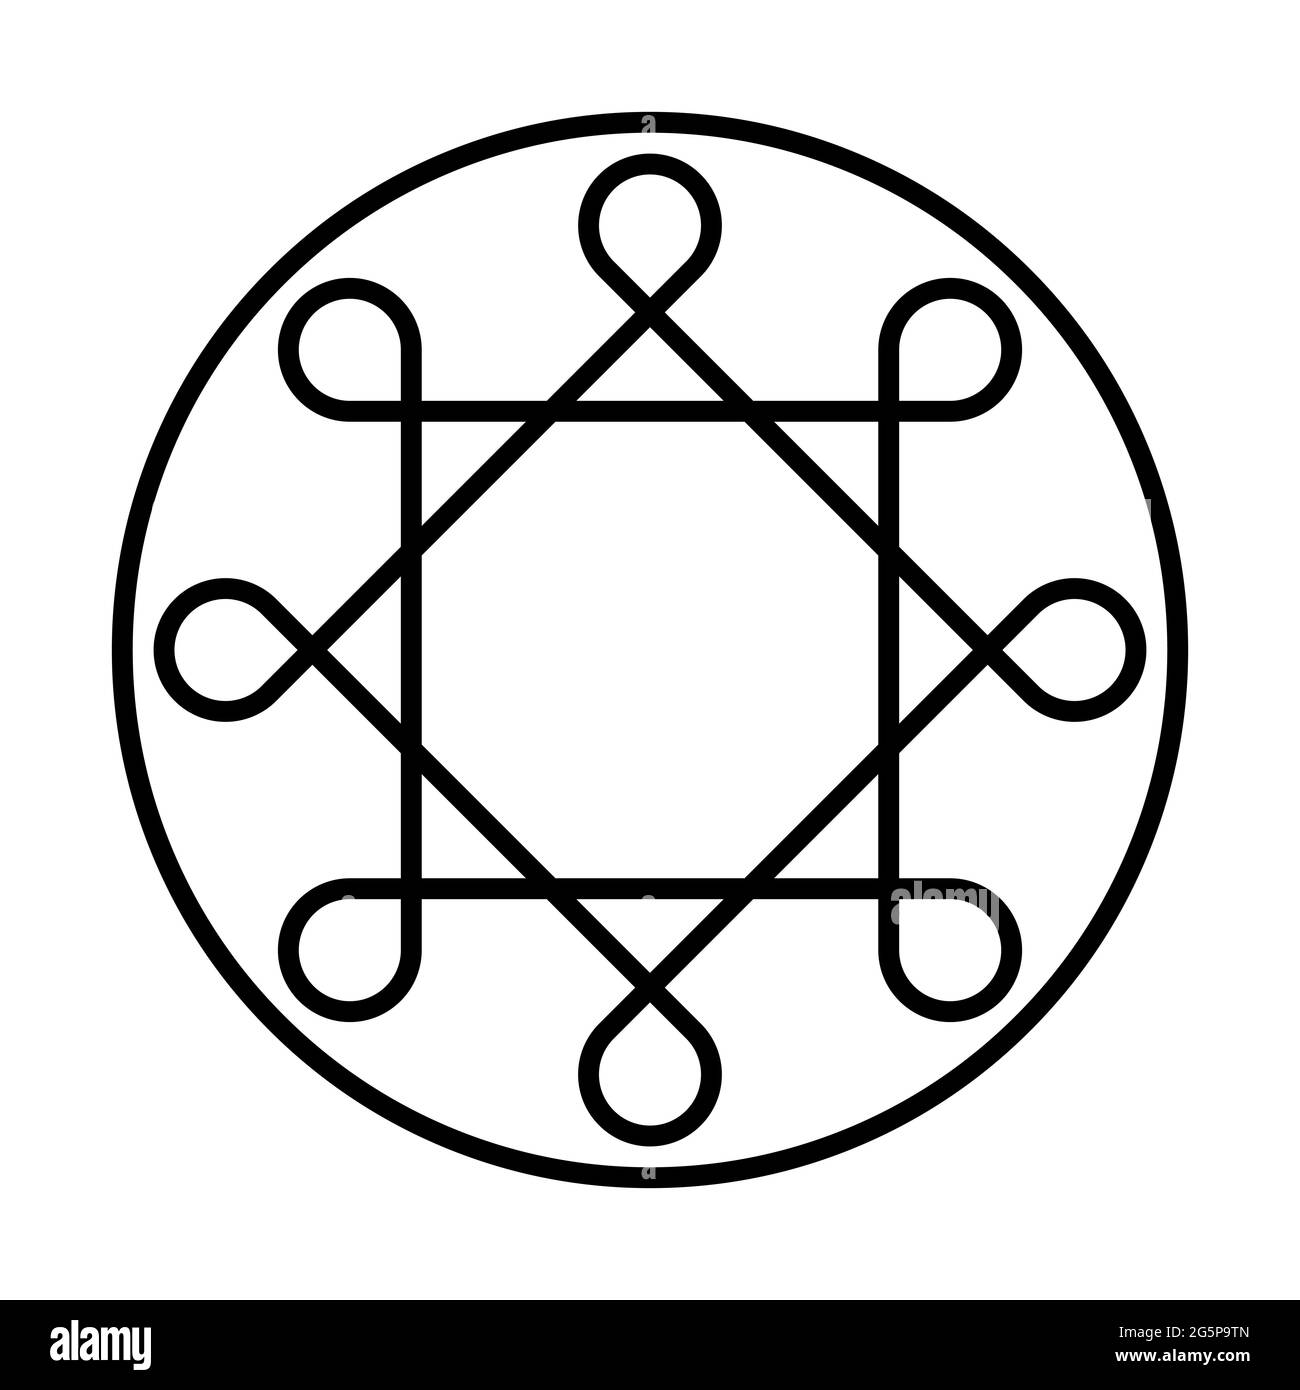 Ring of Solomon. Two overlapping squares with eight looped corners, within a circle frame. Thousands of years old ancient symbol. Stock Photo